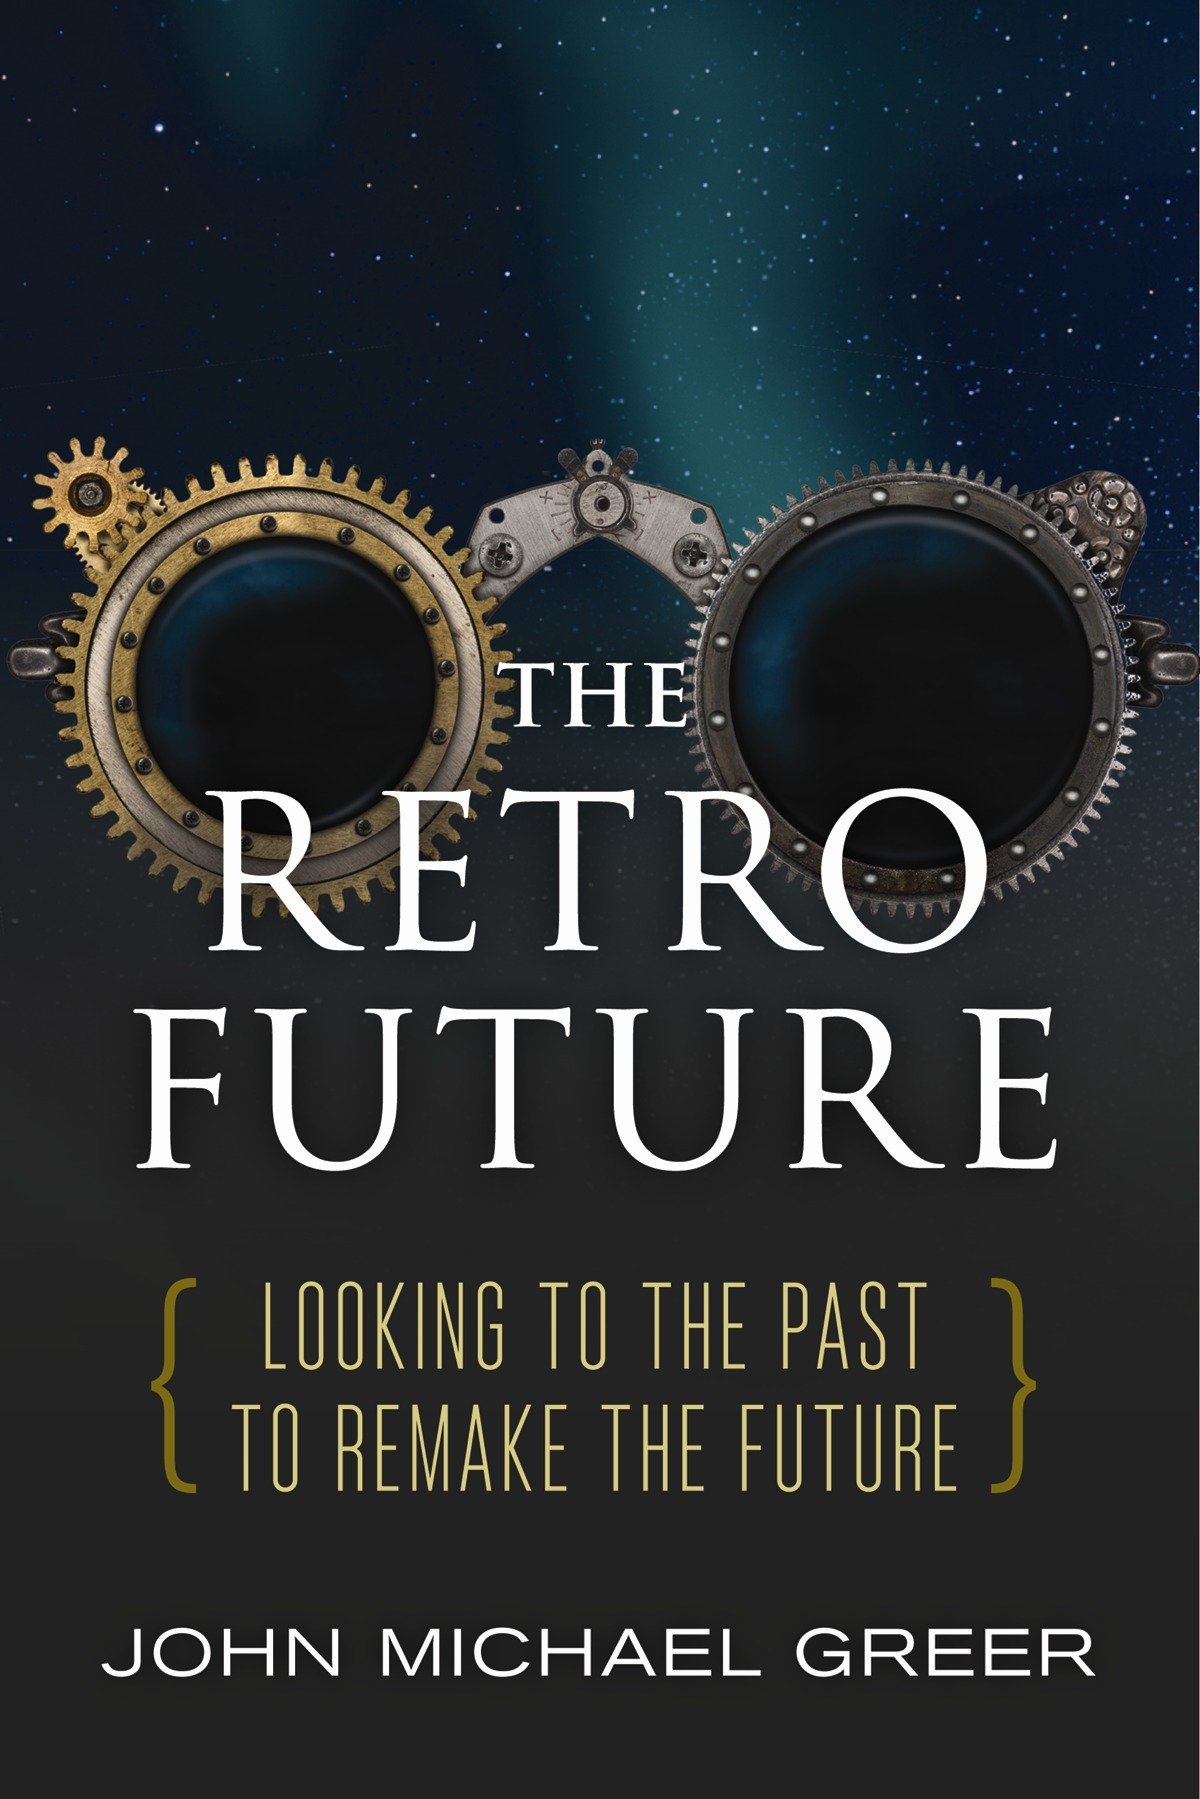 The Retro Future: Looking to the Past to Reinvent the Future